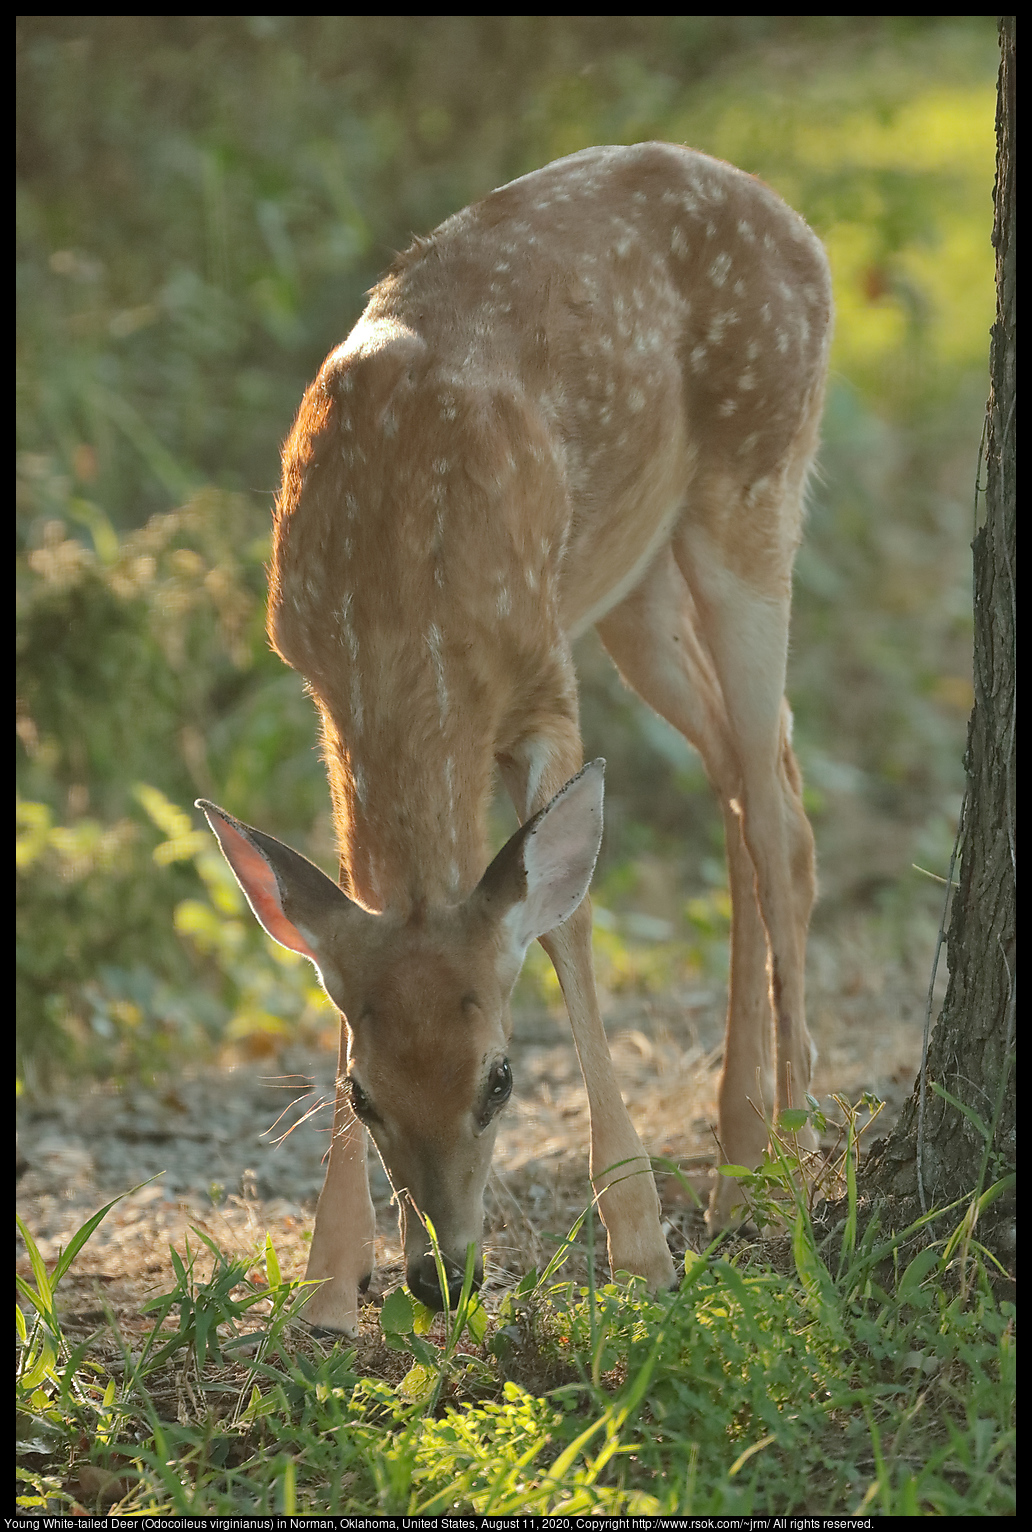 Young White-tailed Deer (Odocoileus virginianus) in Norman, Oklahoma, United States, August 11, 2020